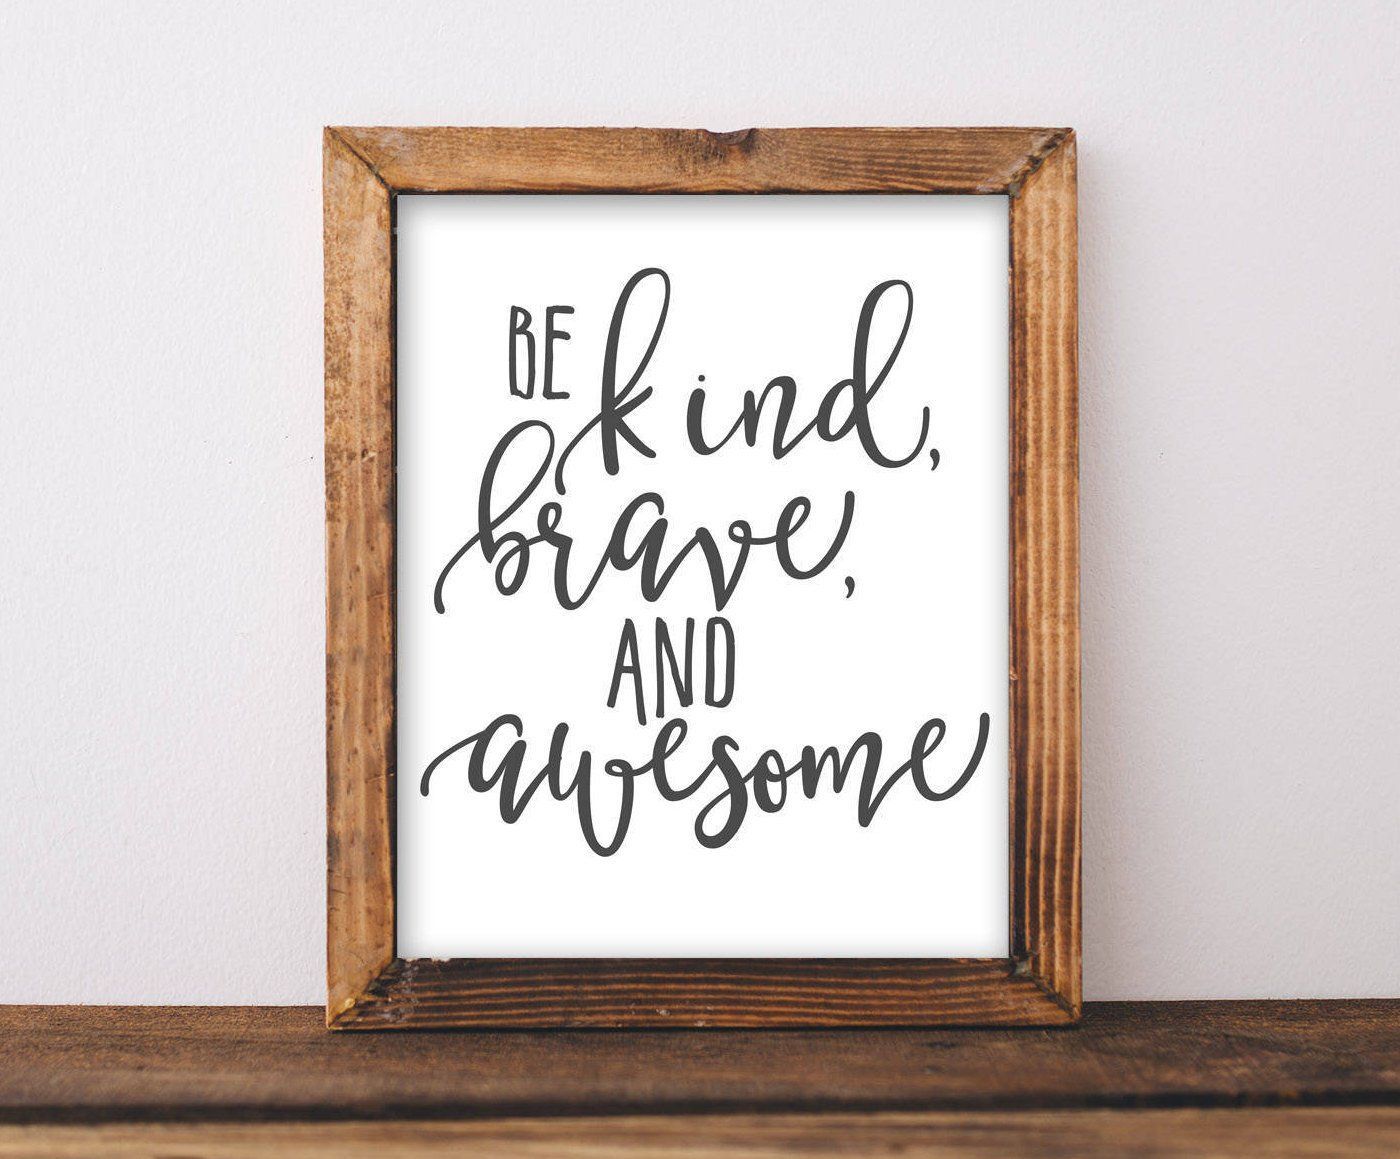 Printable Art Be kind brave and awesome Inspirational | Etsy - Printable Art Be kind brave and awesome Inspirational | Etsy -   19 diy projects to try home decor wall art ideas